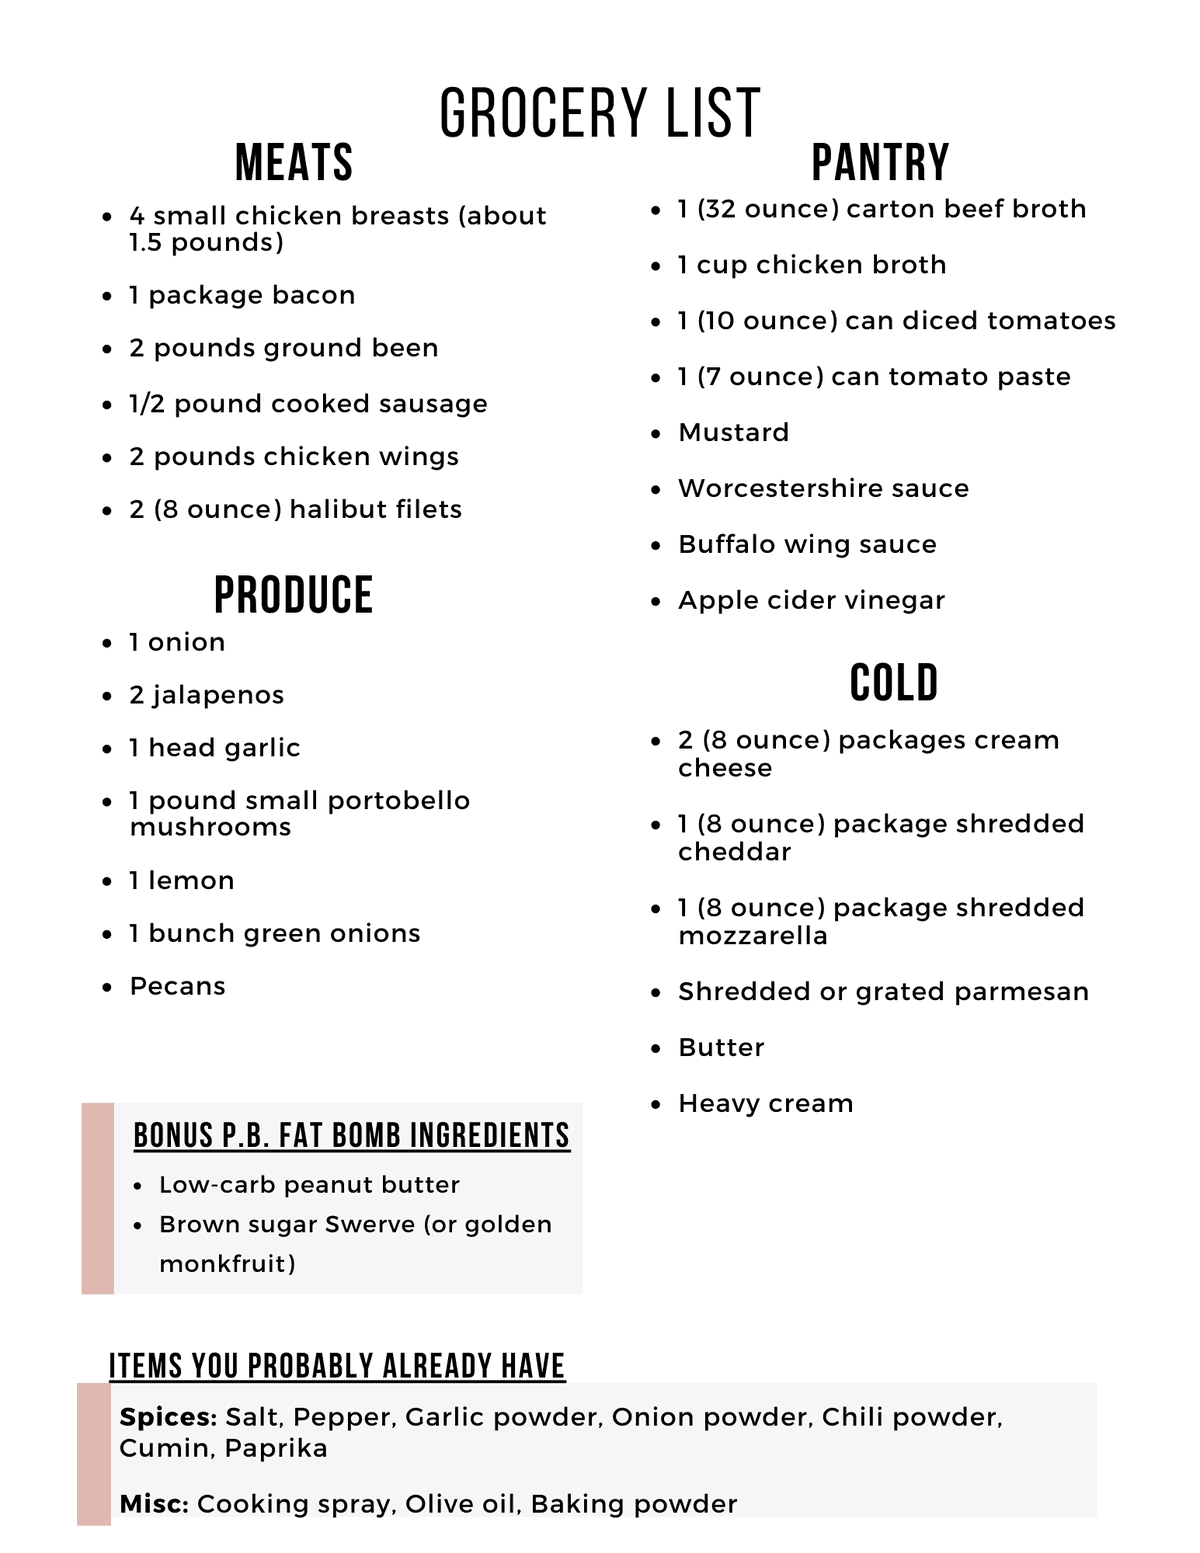 Download the printable keto grocery list to simplify your weekly meal prepping!